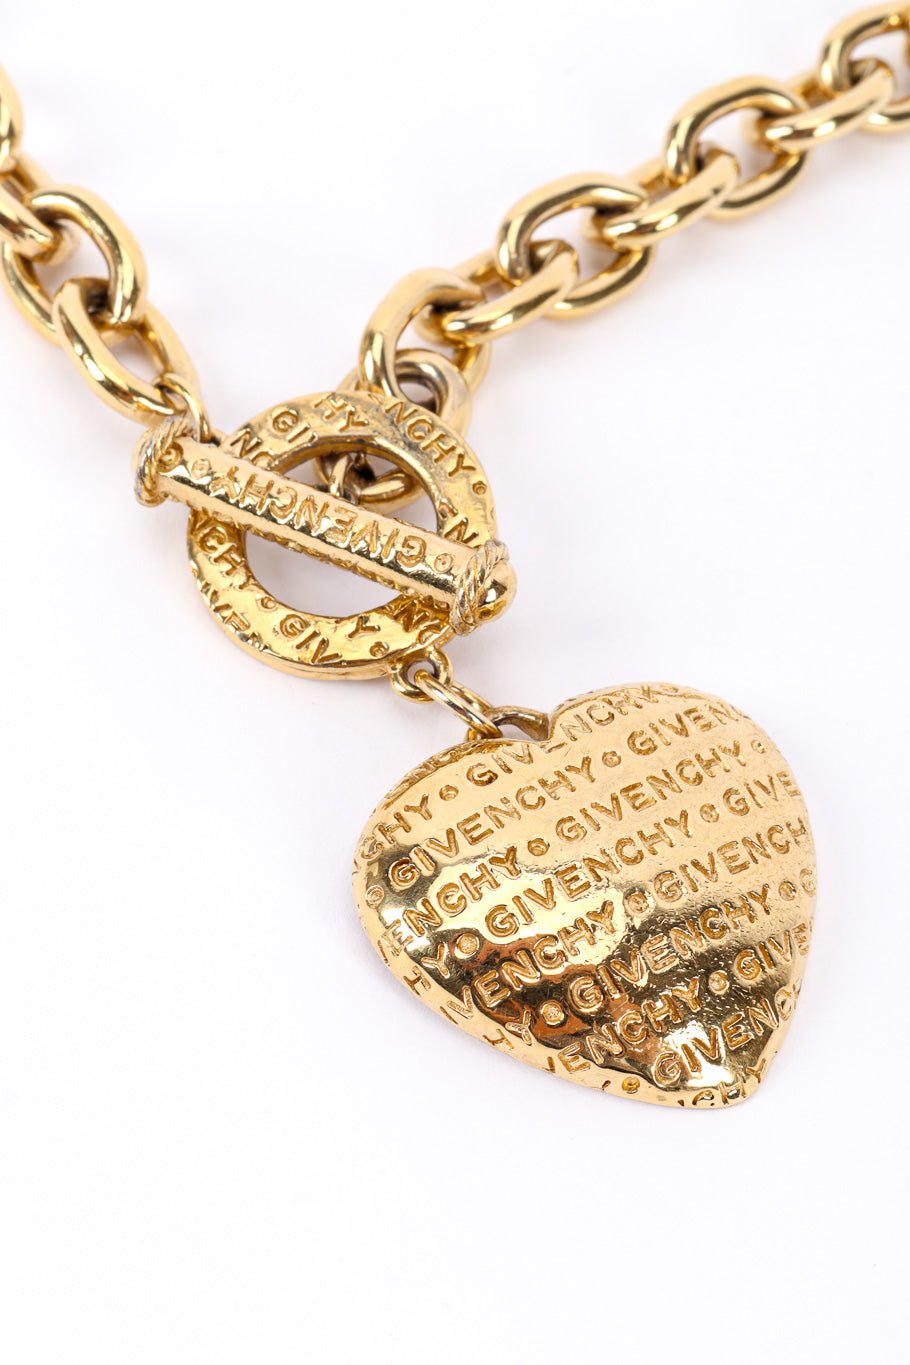 Heart charm necklace by Givenchy on white background heart close @recessla